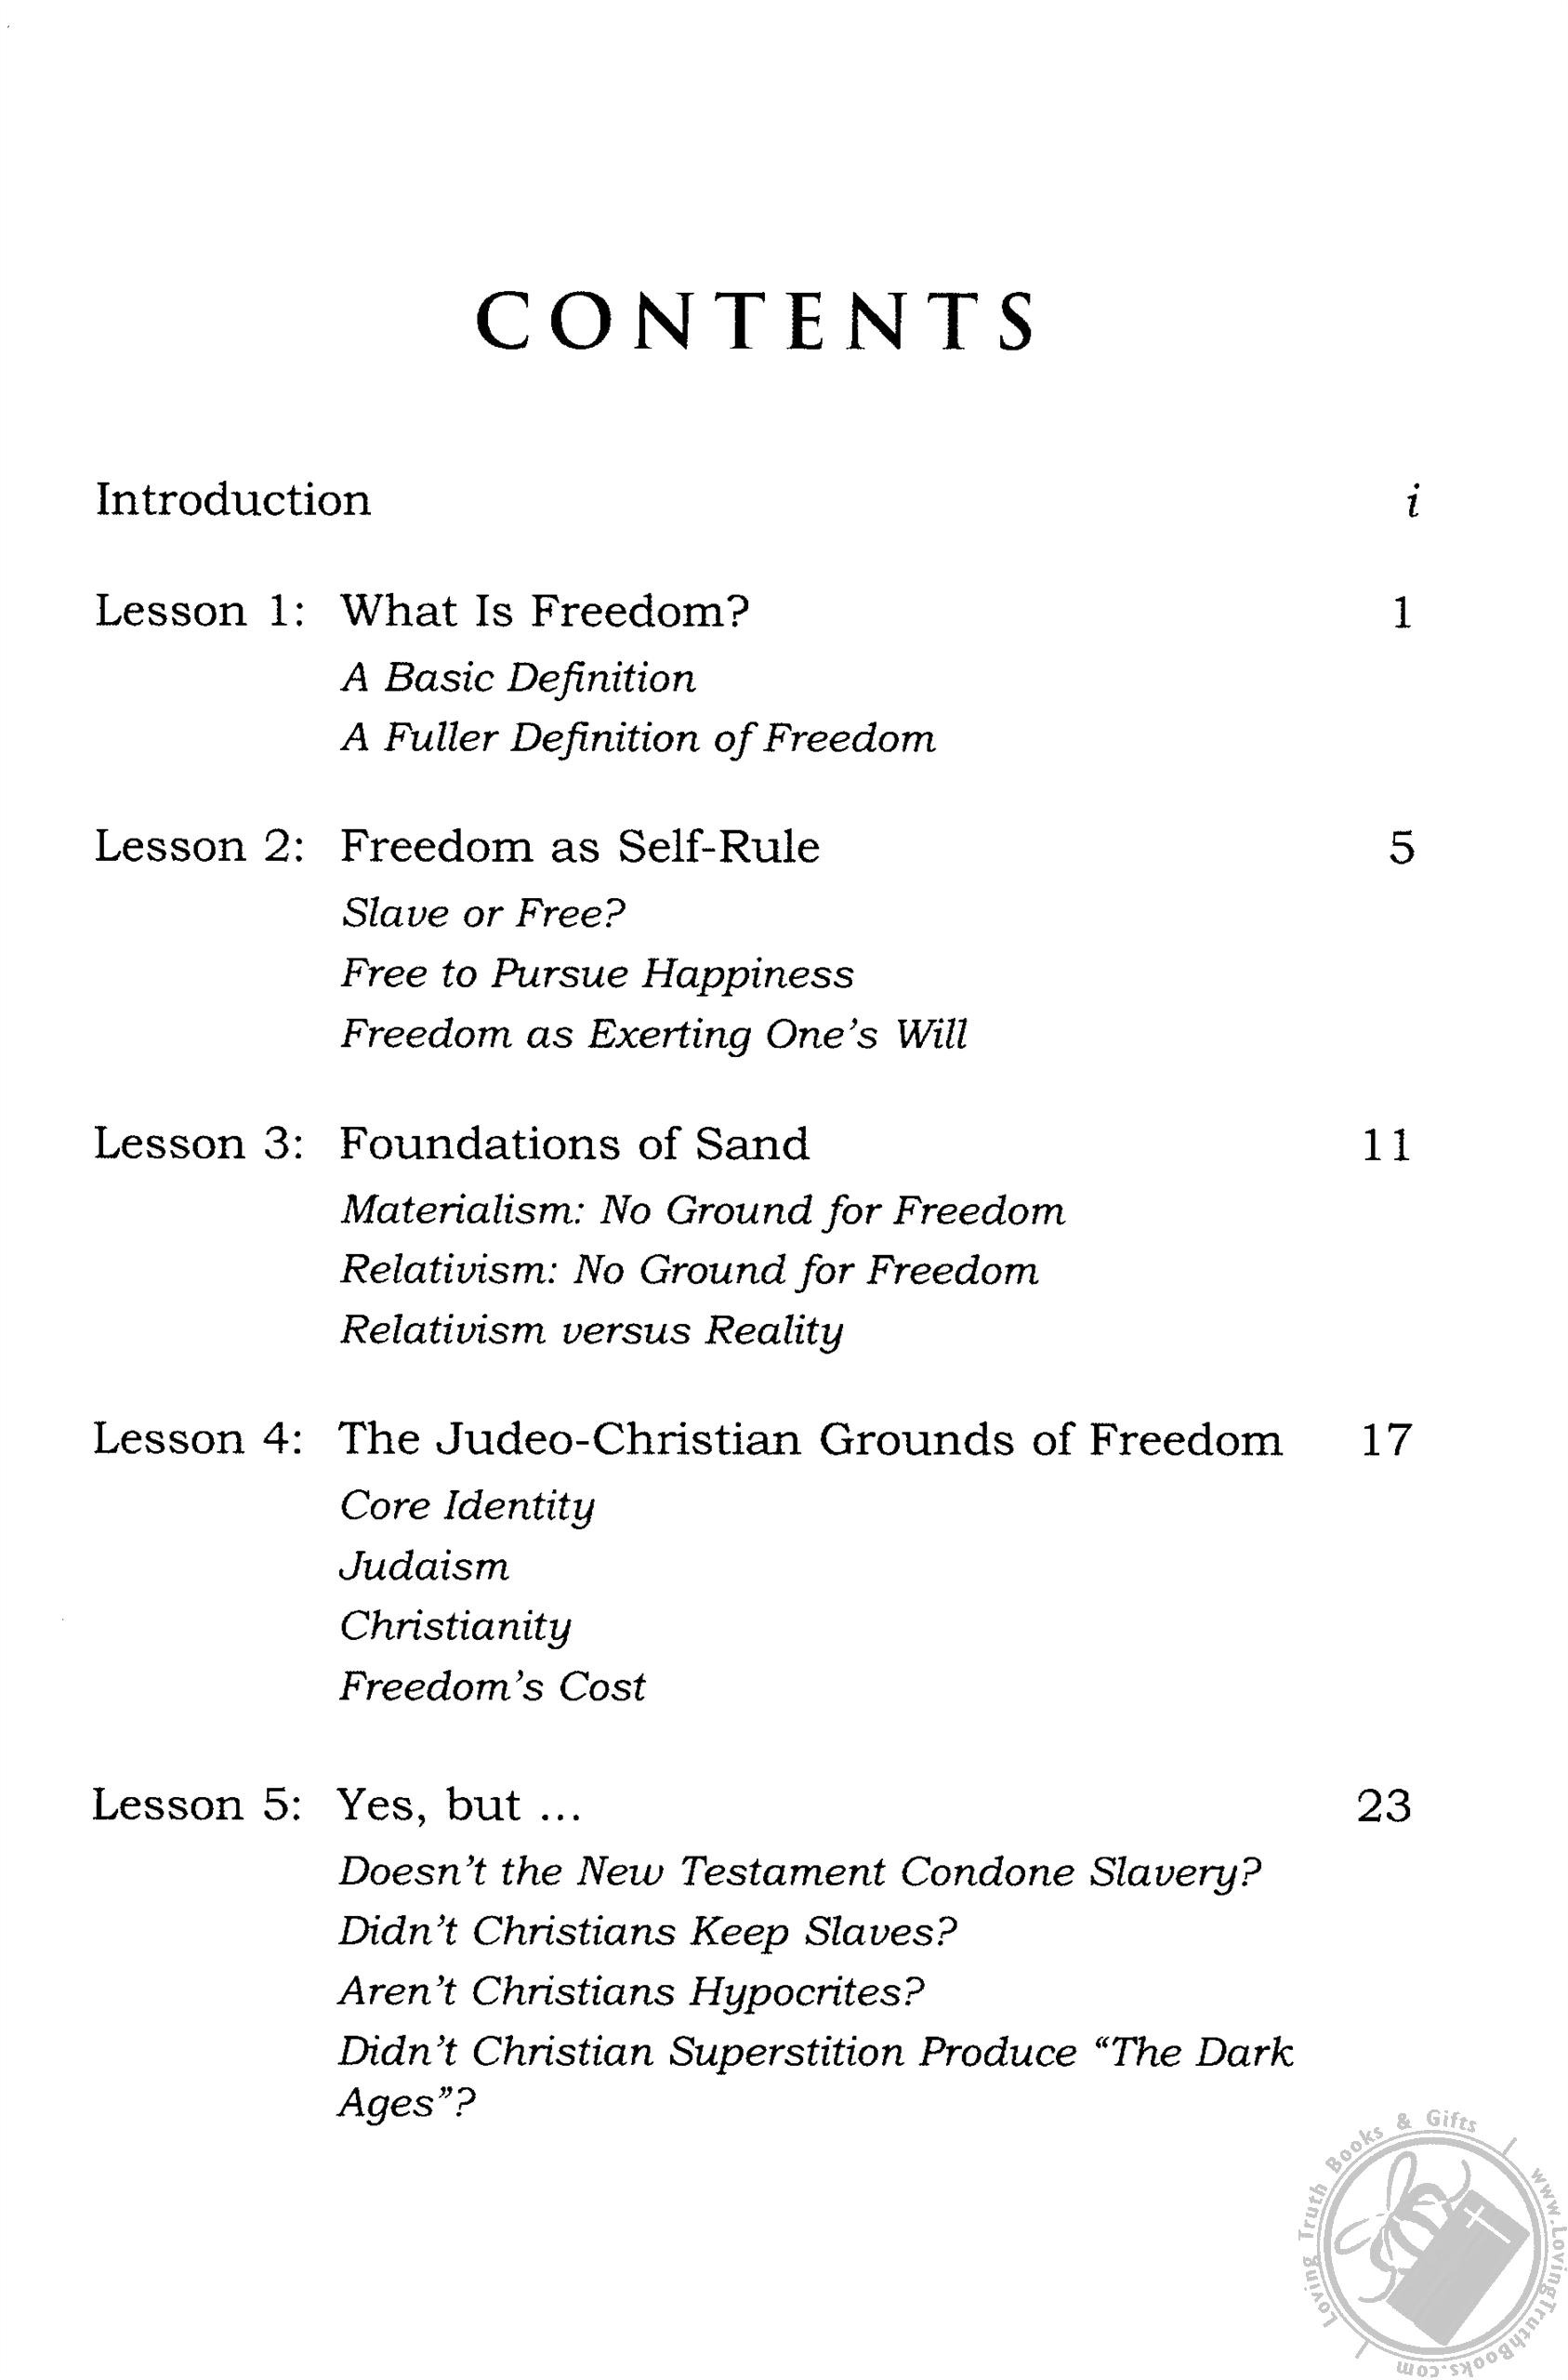 The Birth of Freedom (DVD & Study Guide) by Acton Institute (DVD / Documentary ...1687 x 2560